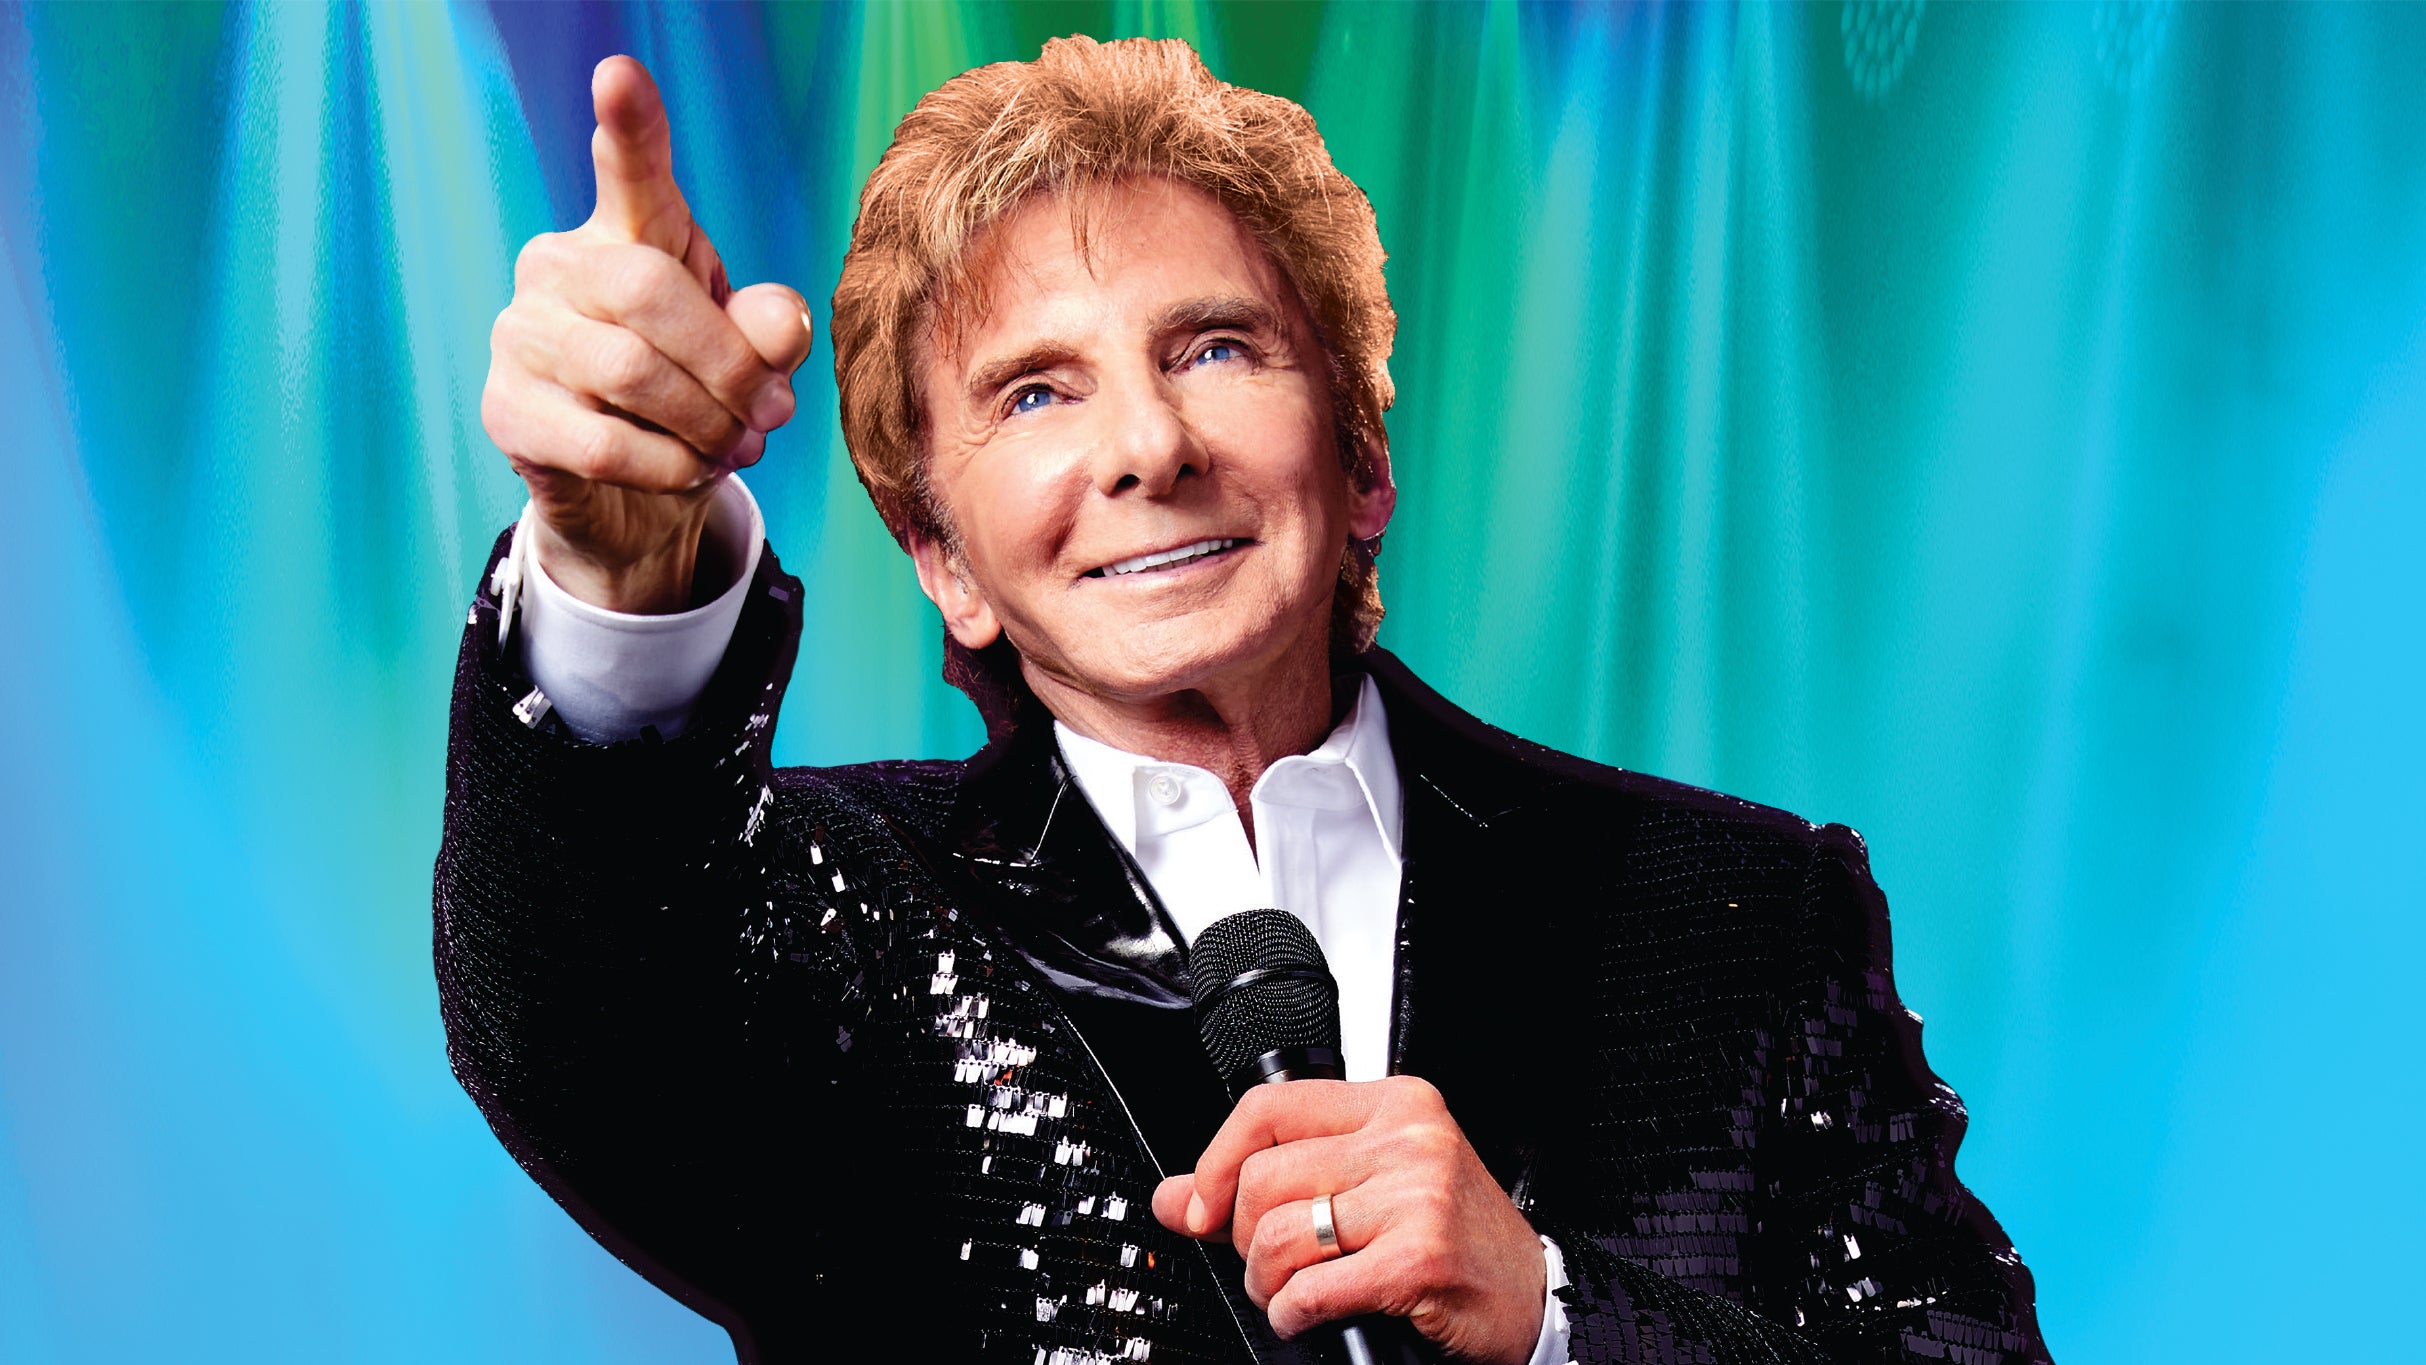 Barry Manilow at Wells Fargo Arena - Des Moines